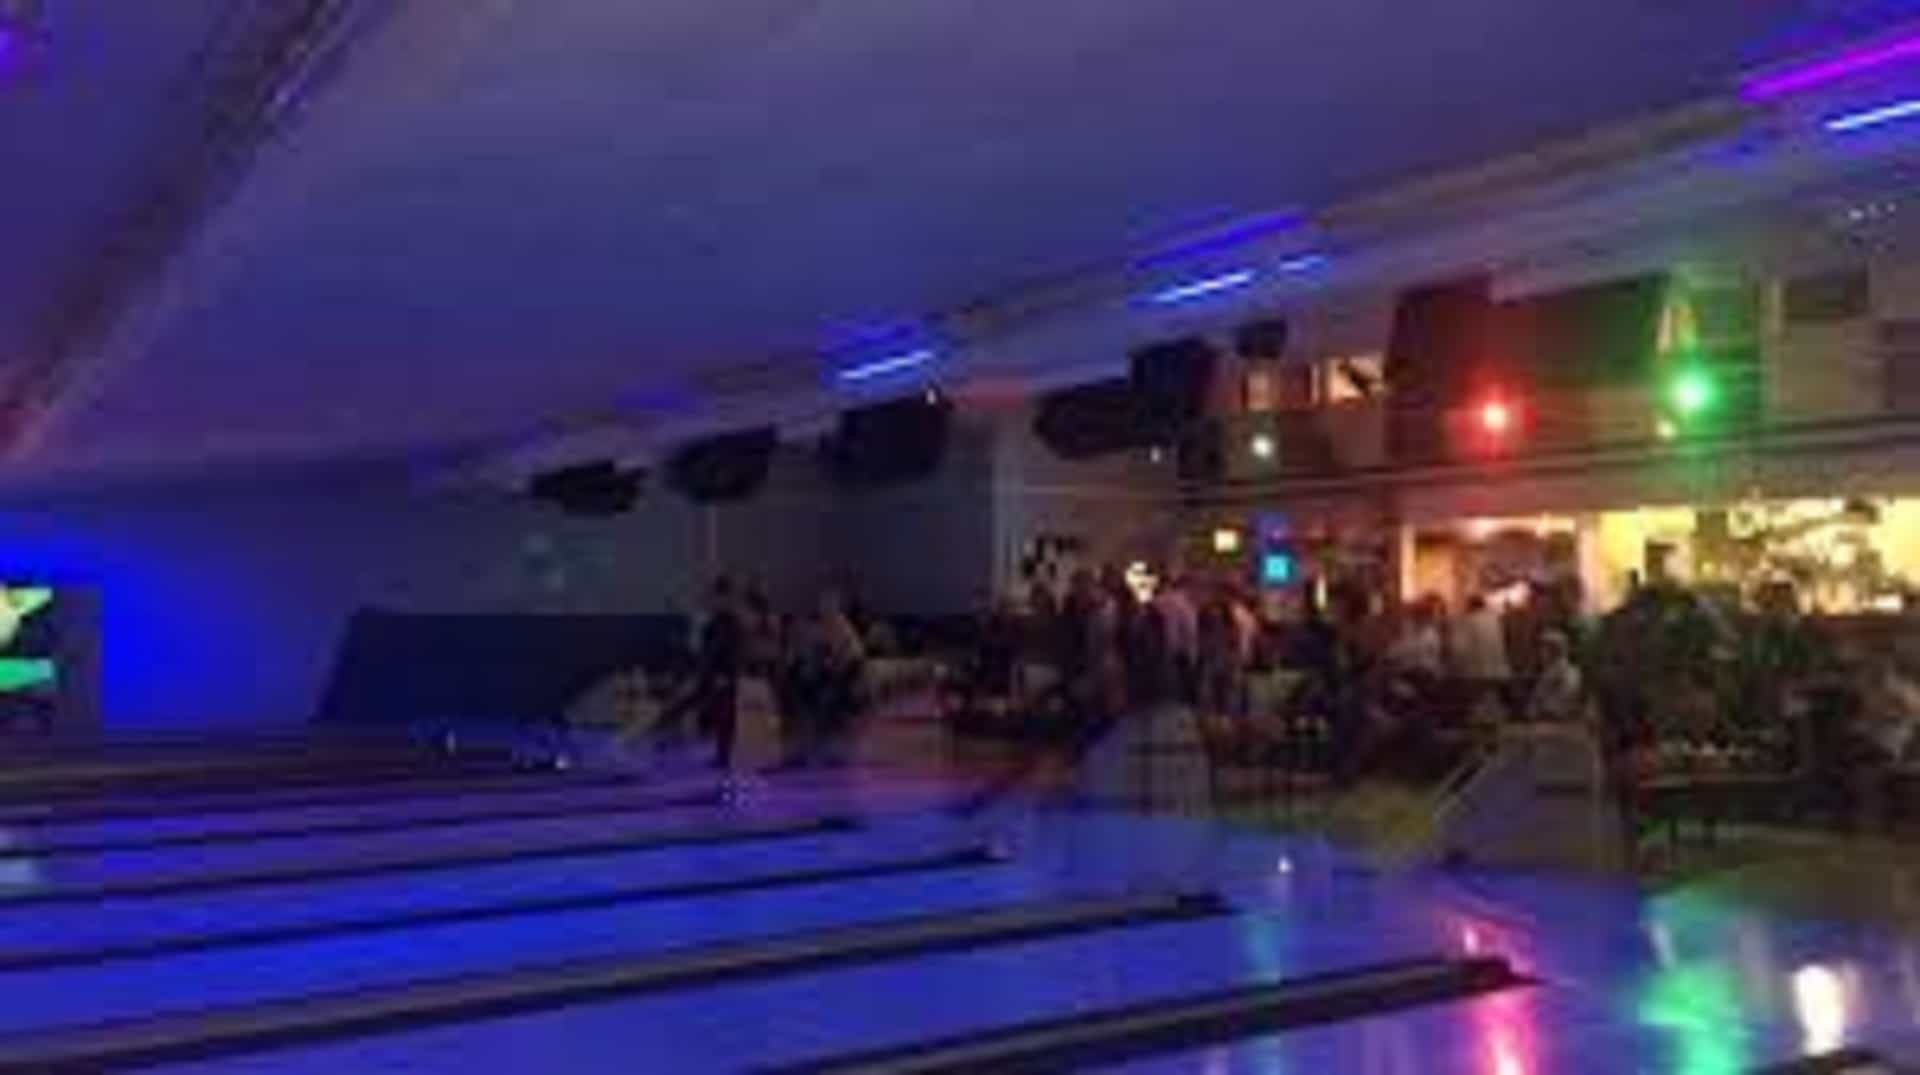 Go Bowling in UK